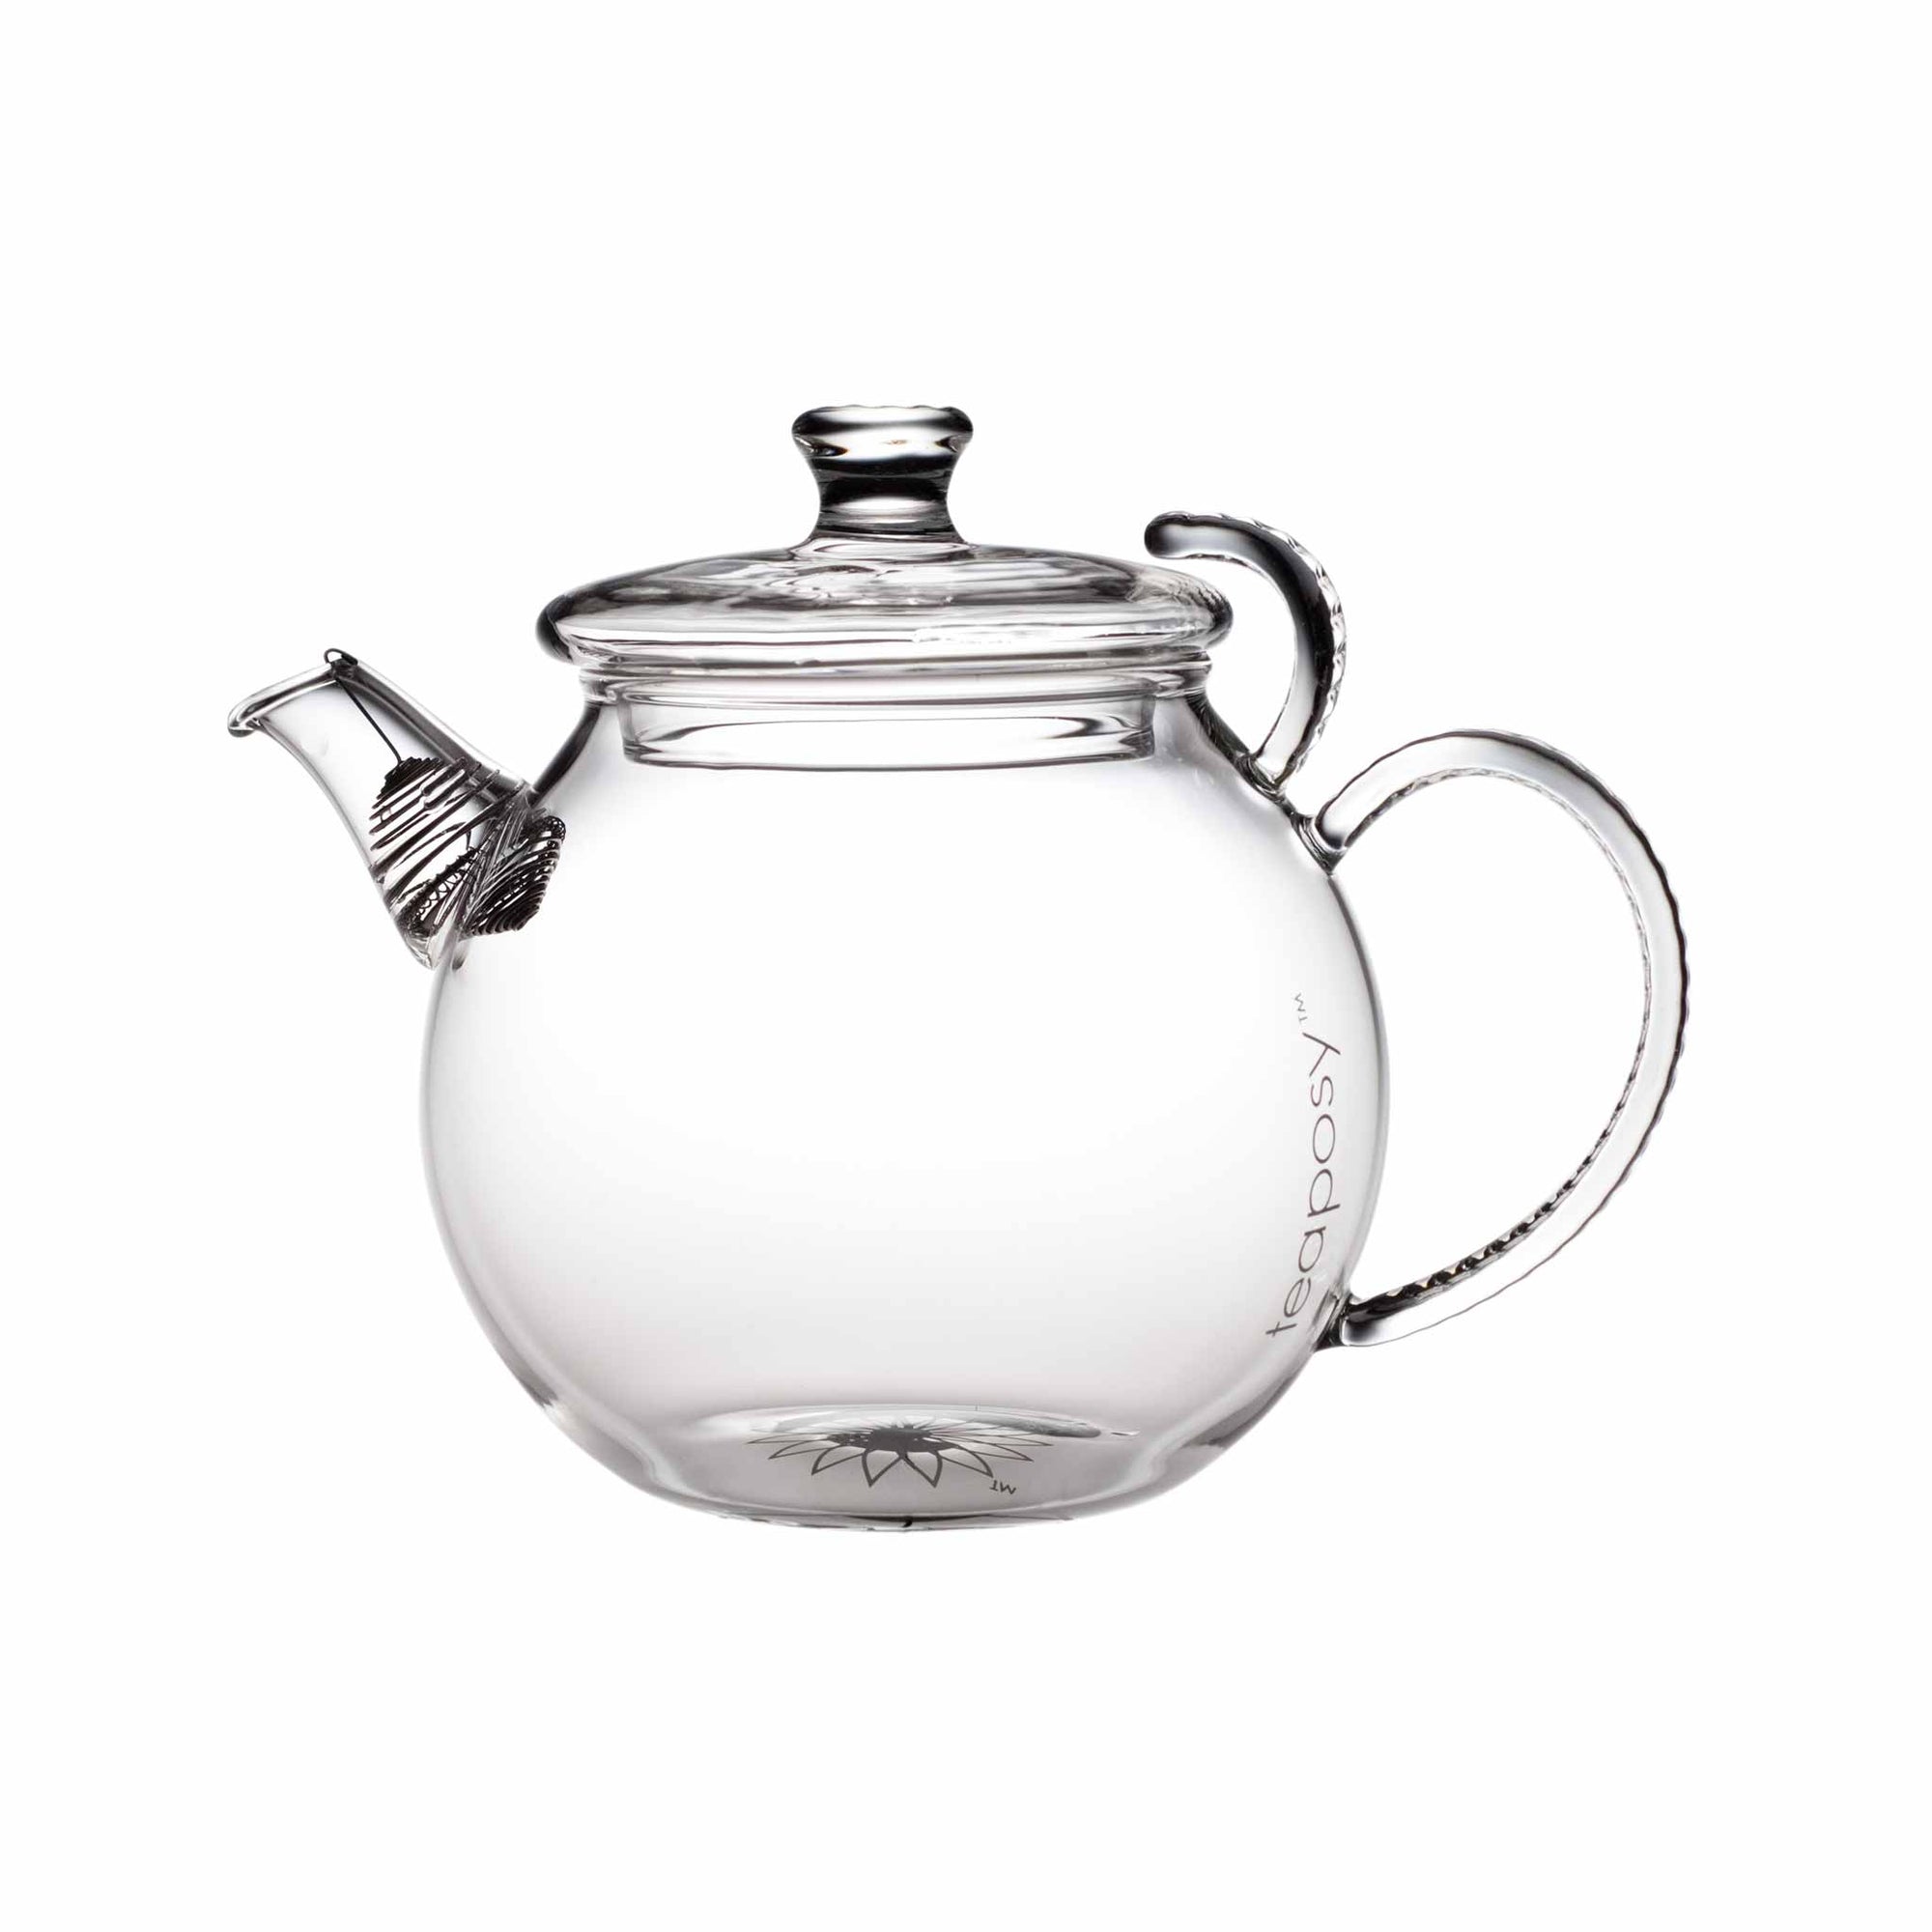 Teaposy daydream glass teapot, round shaped with crystal like handle, and a stainless steel filter at the spout